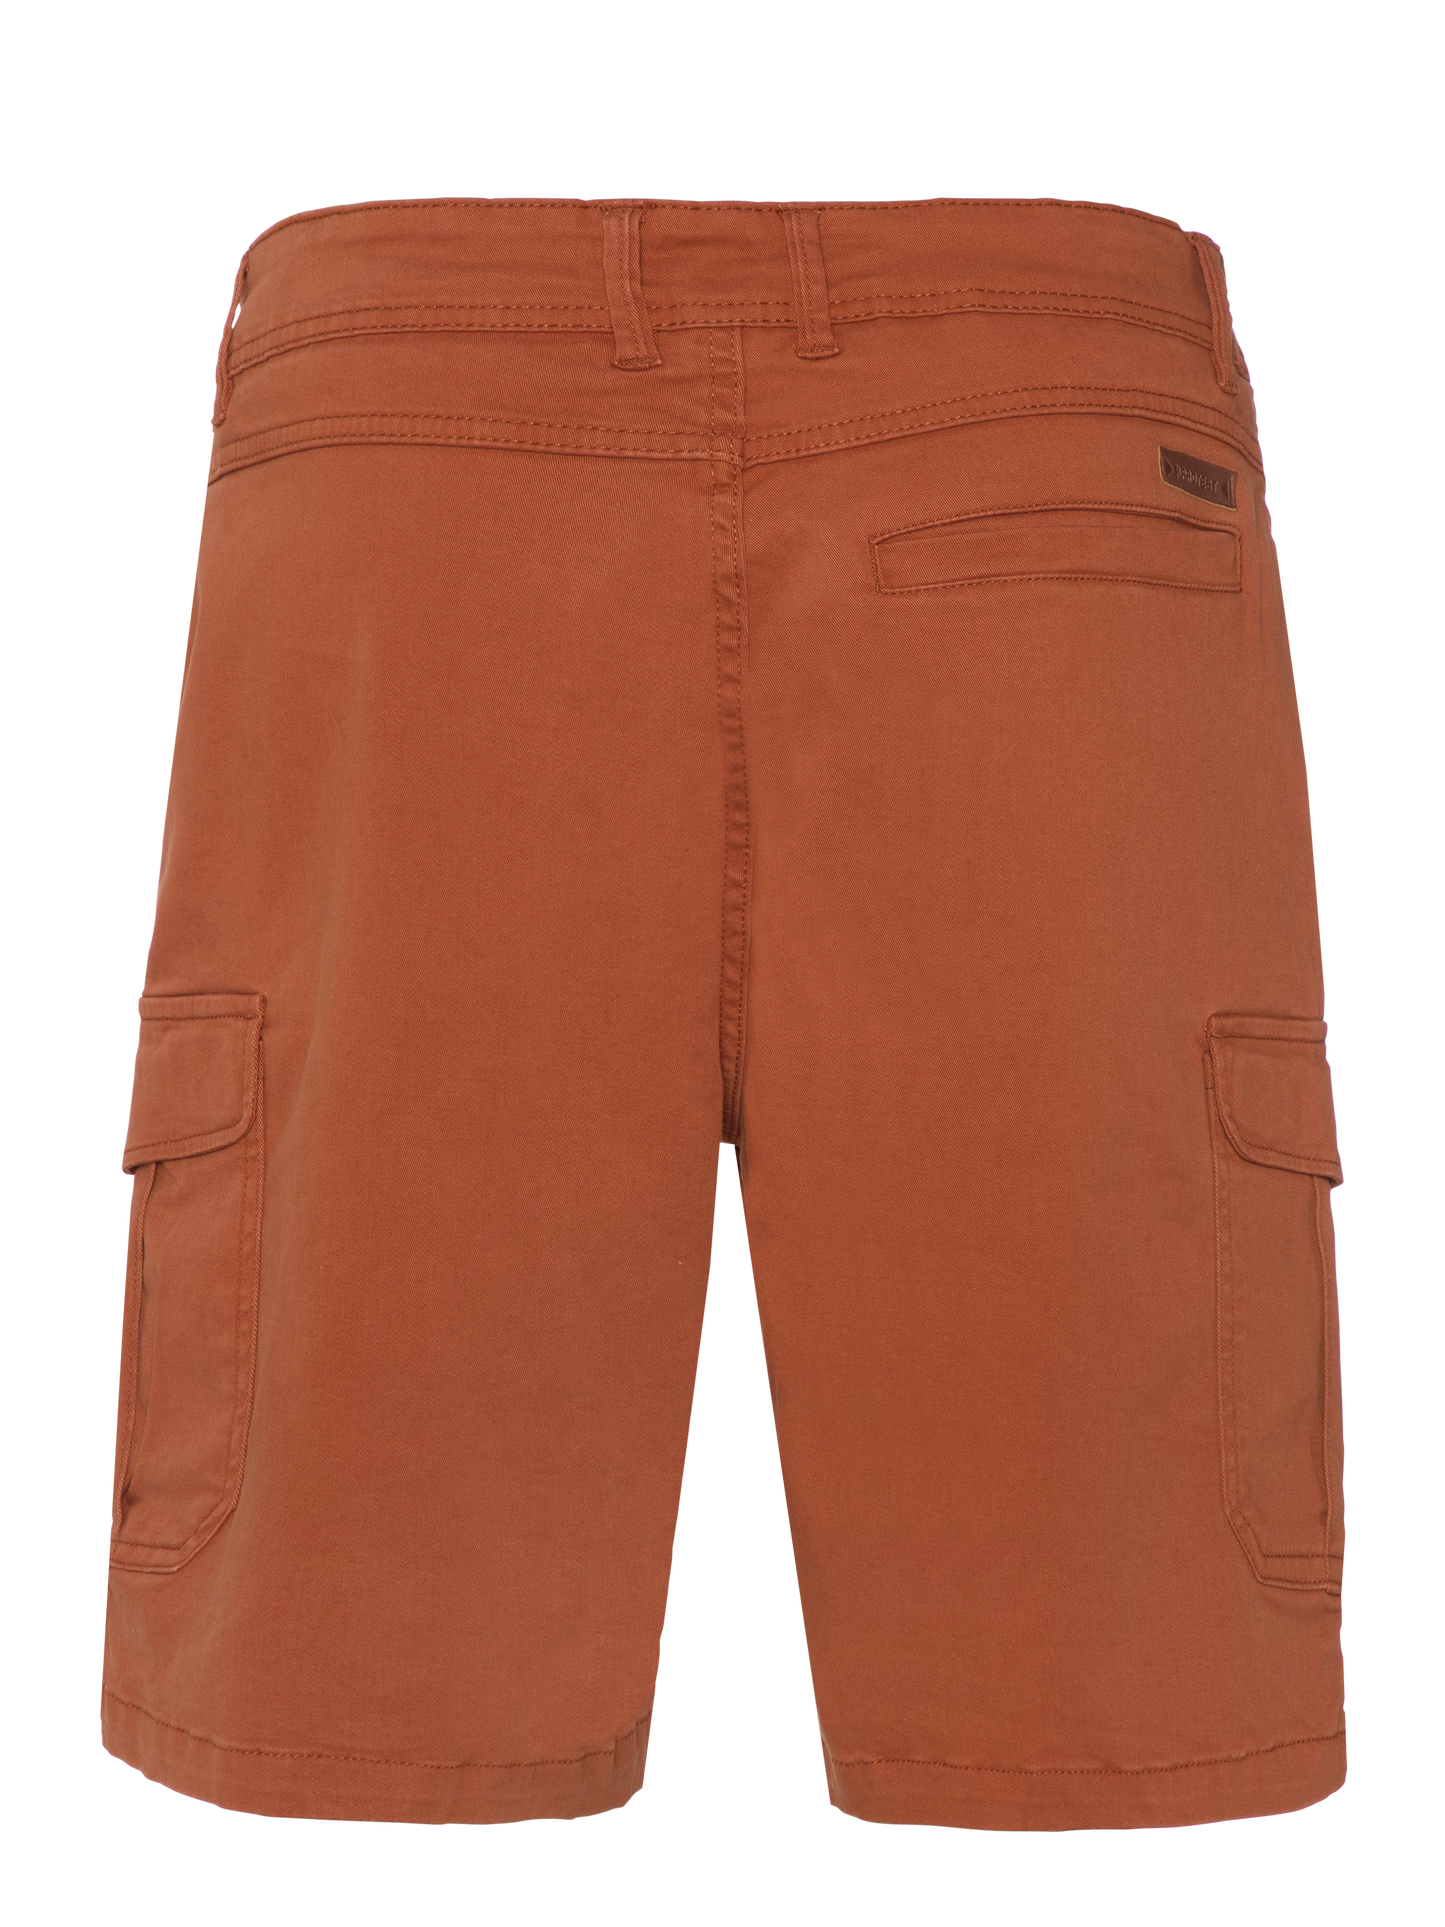 Protest Nytro Walkshorts in Ginger Brown